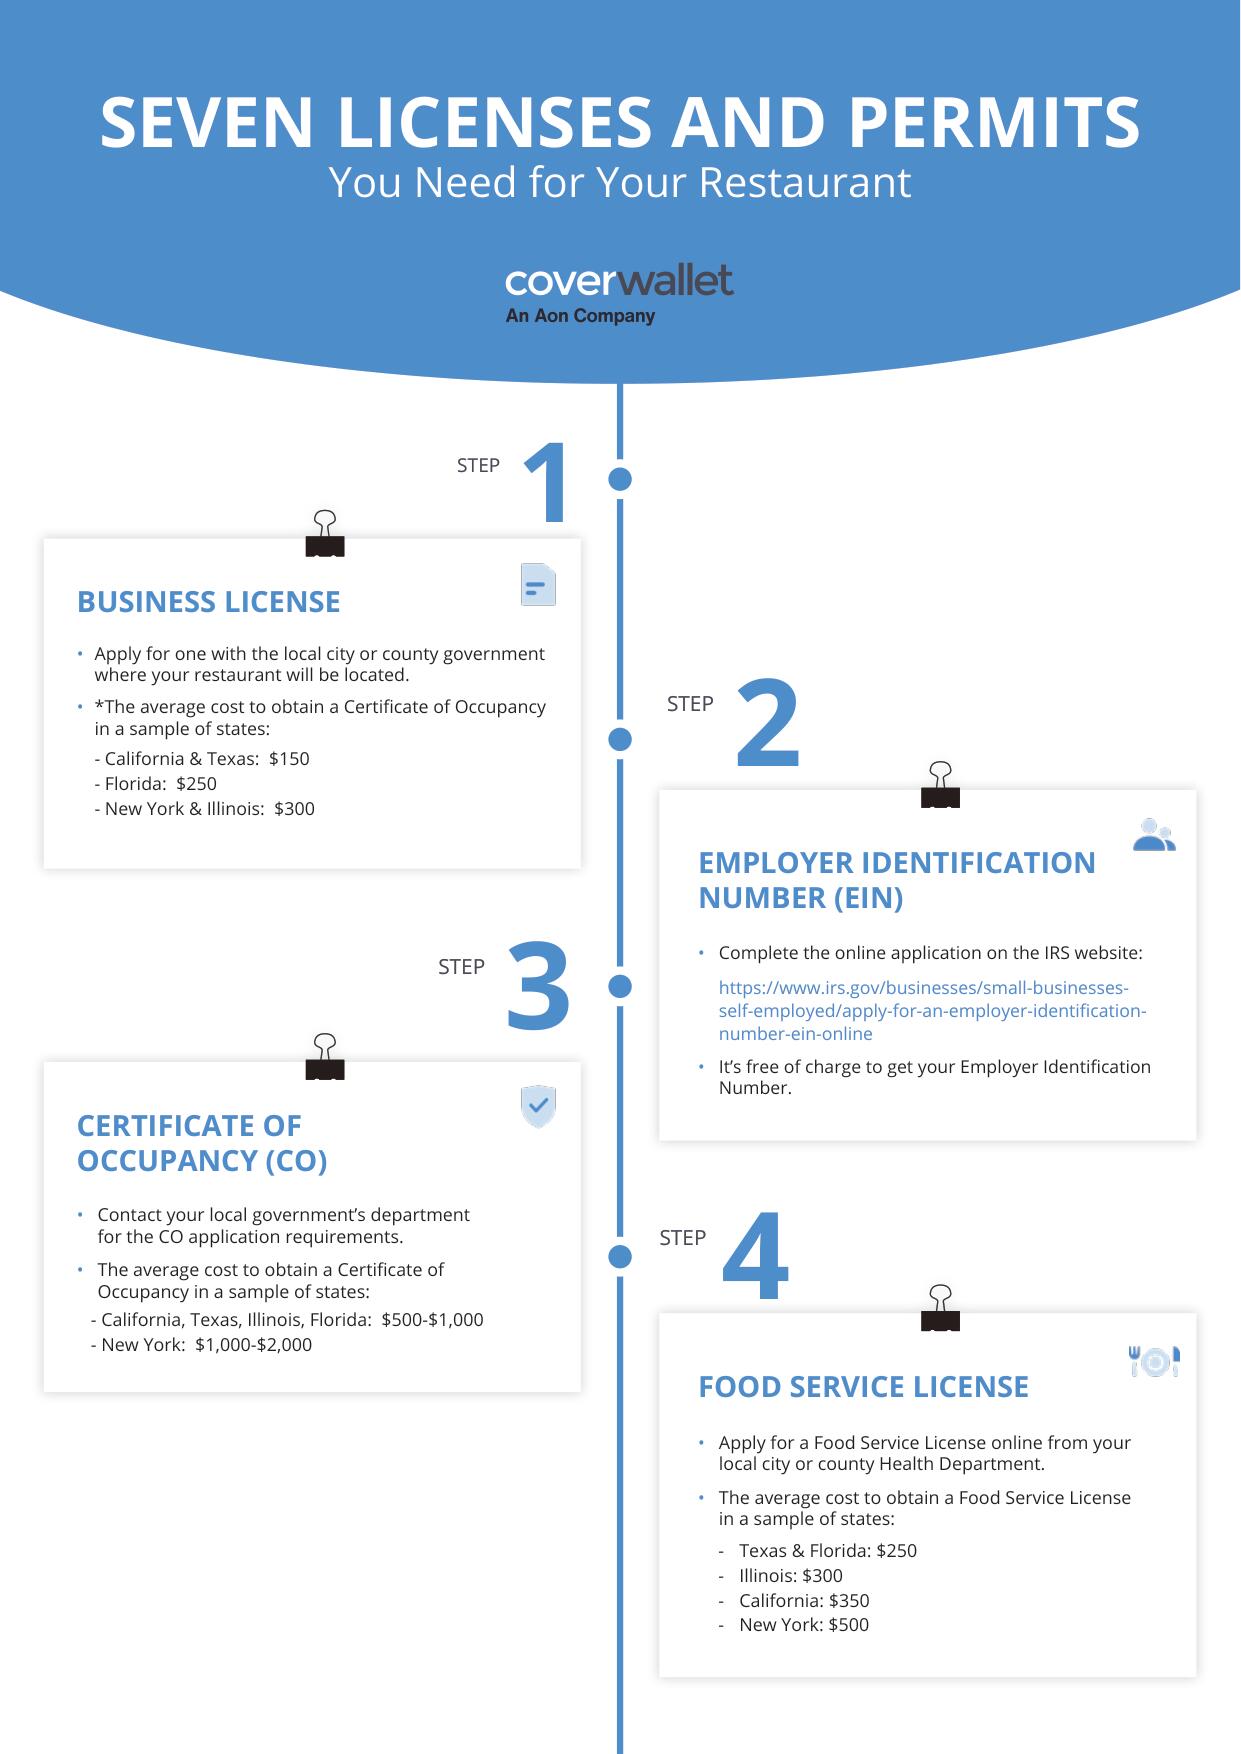 Infographic_1: Seven licences and permits for your restaurant